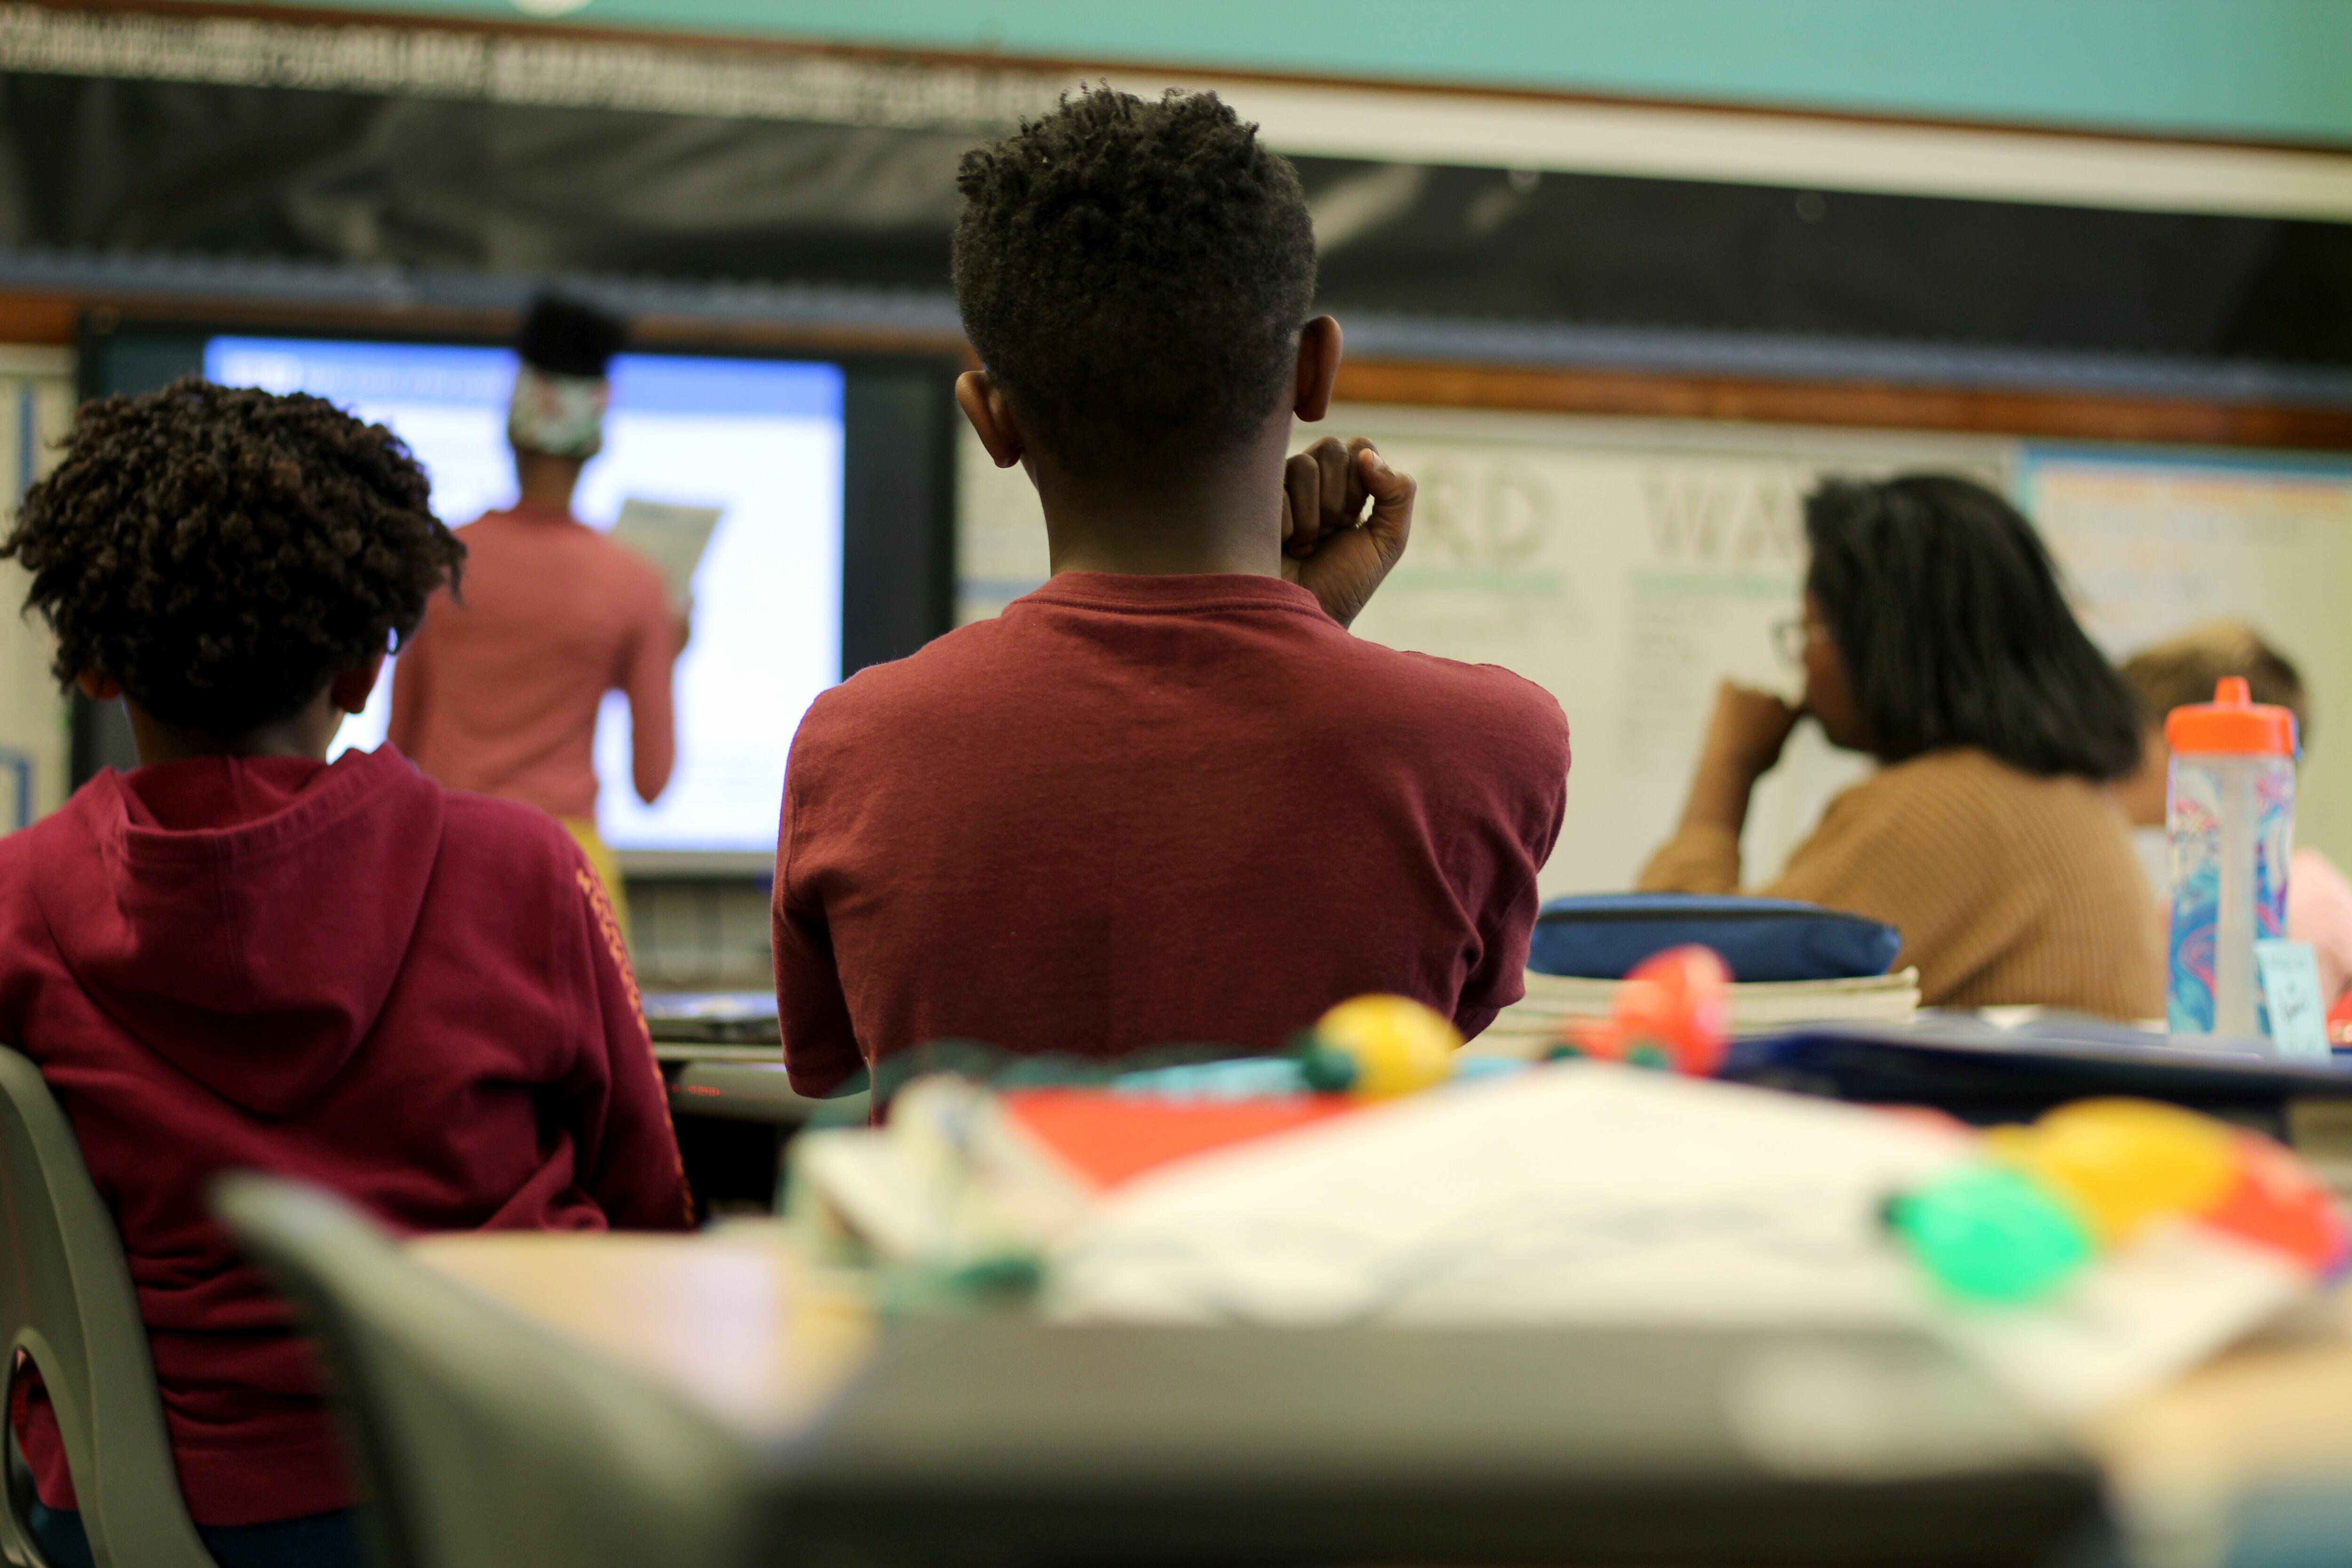 Three students sitting in class face a white board and a projector while their teacher stands at the front of the class.